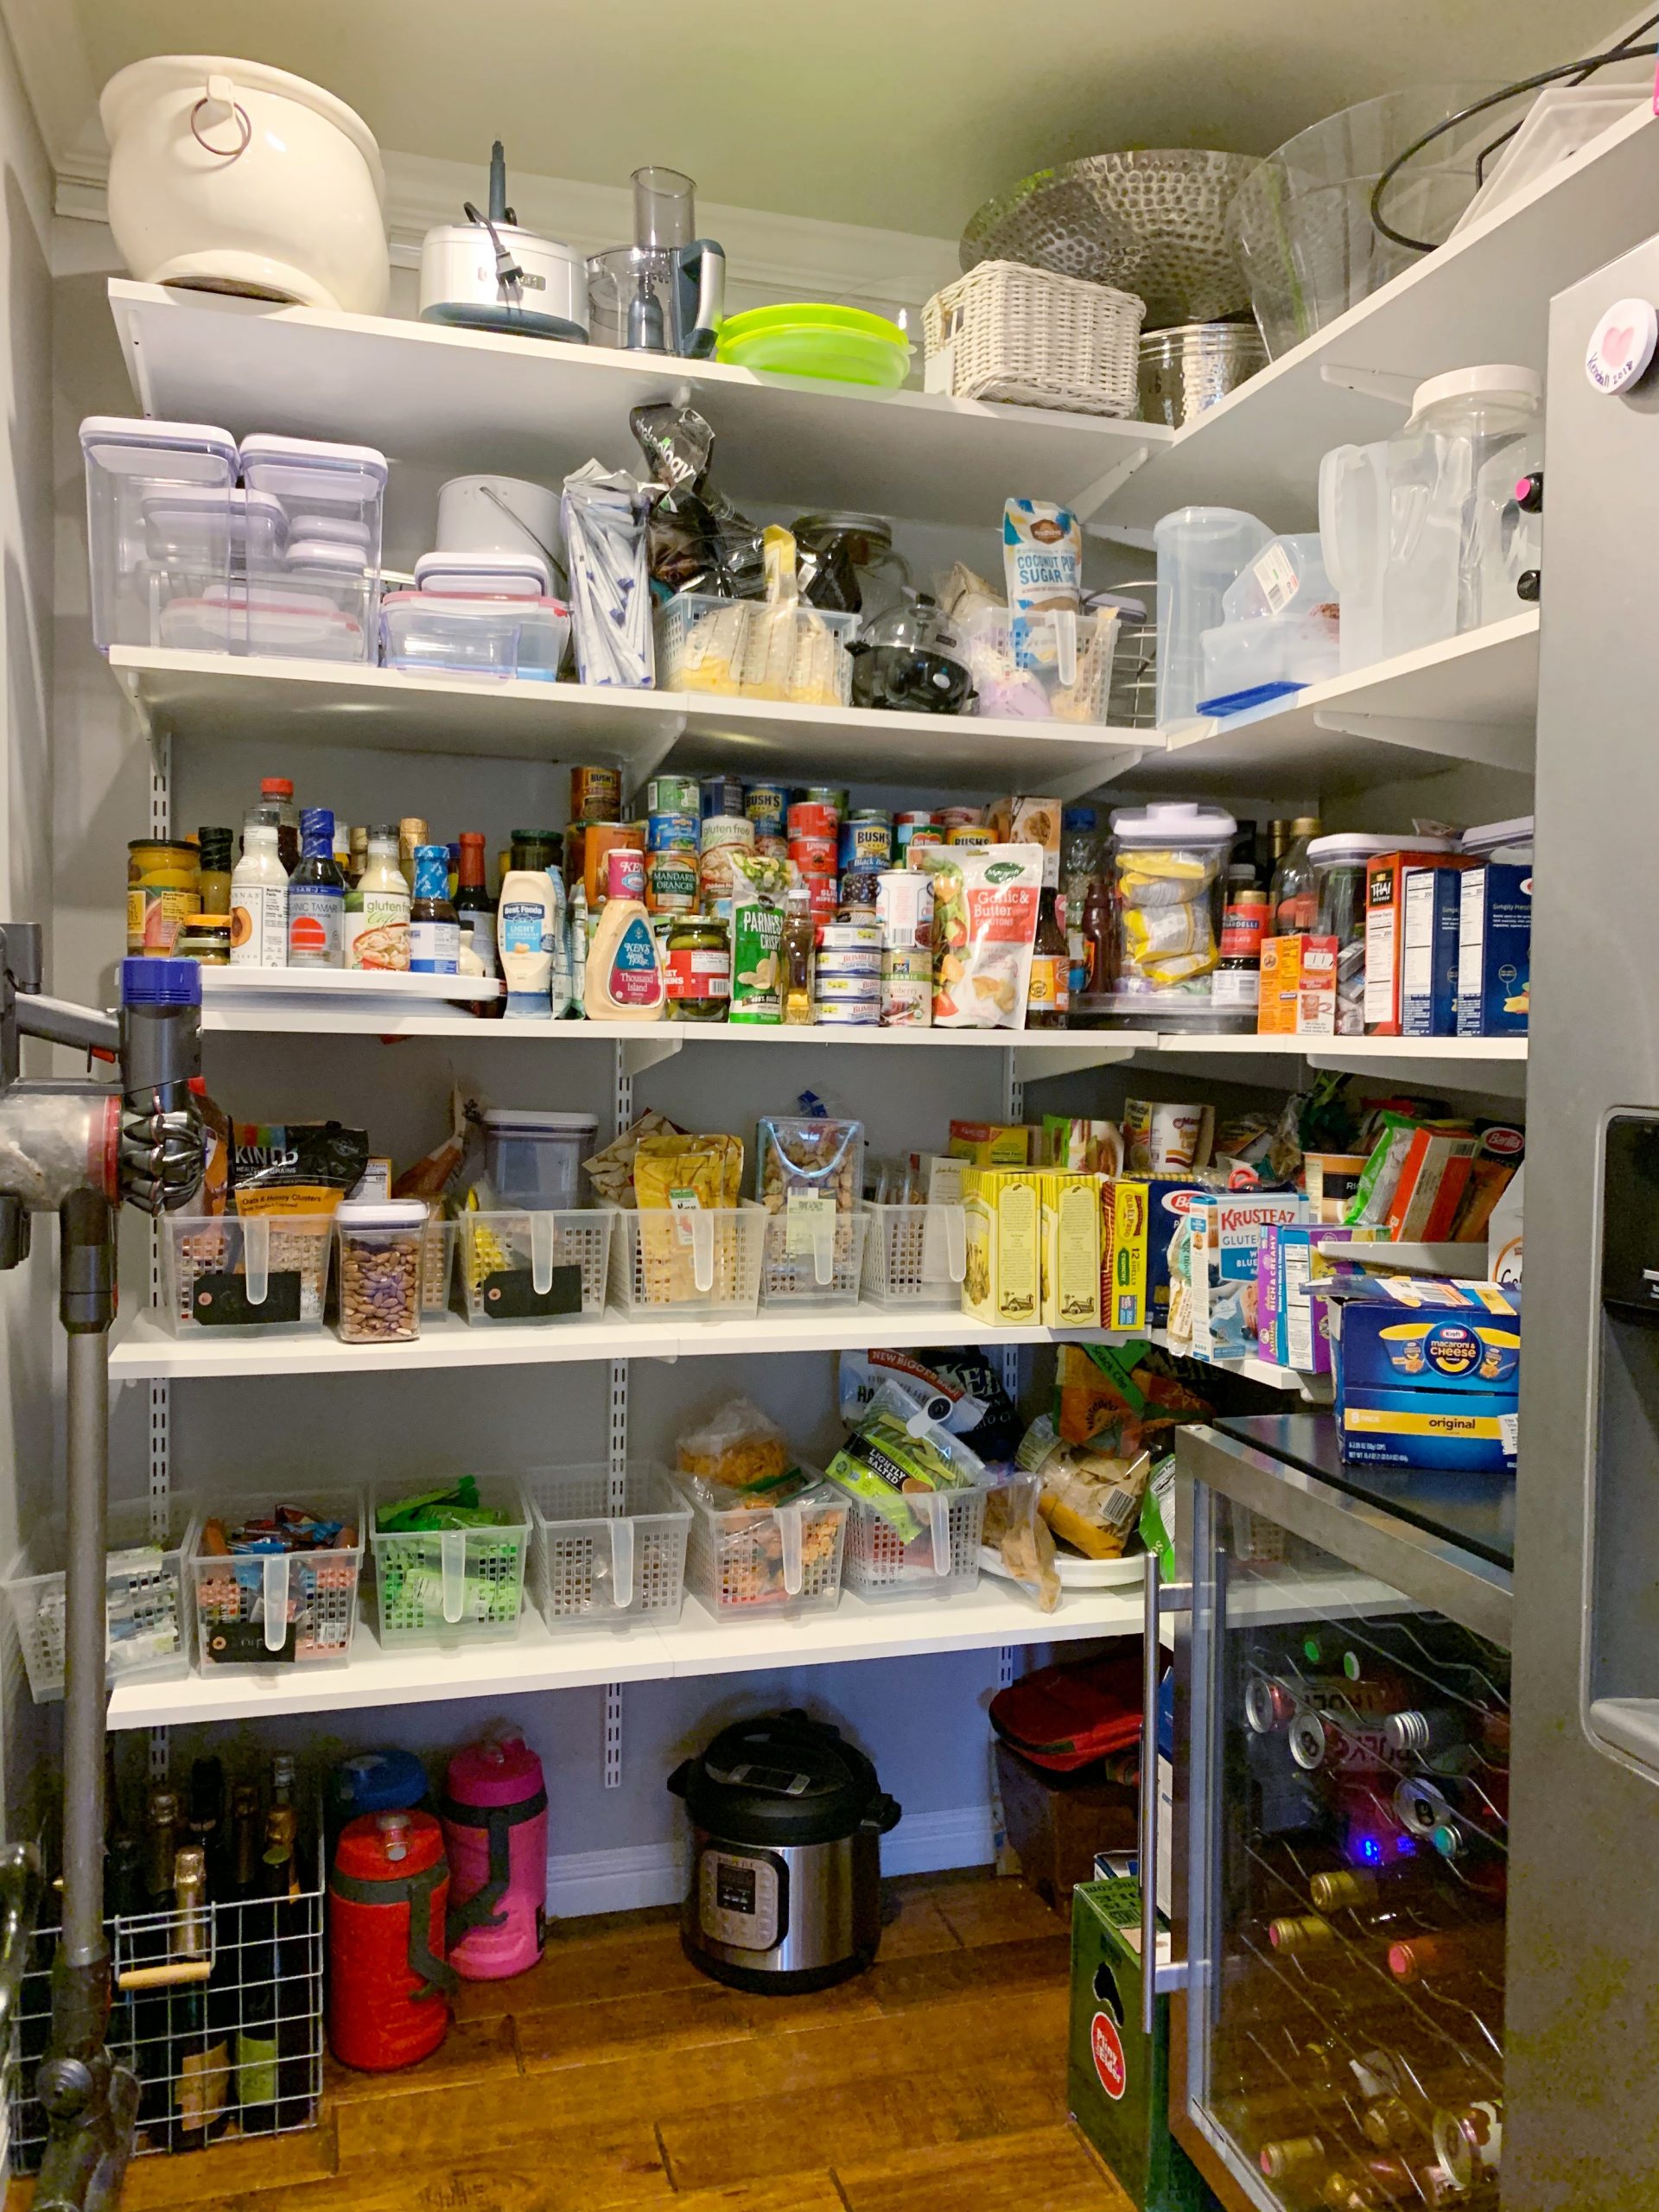 Pantry Makeover - Before and After With My New Favorite Product